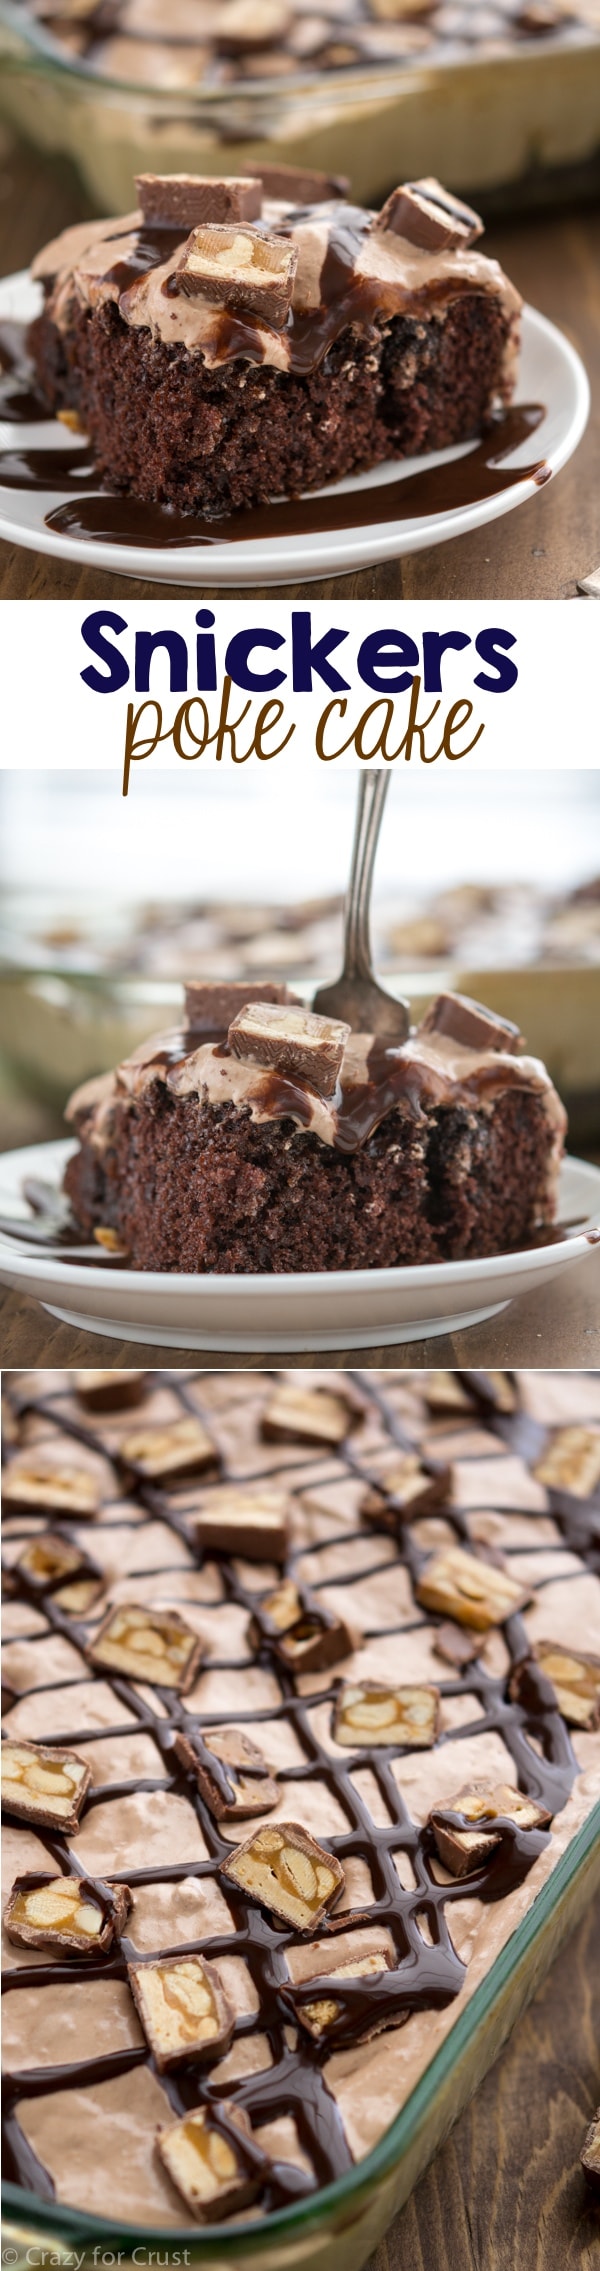 Snickers Poke Cake - Crazy for Crust